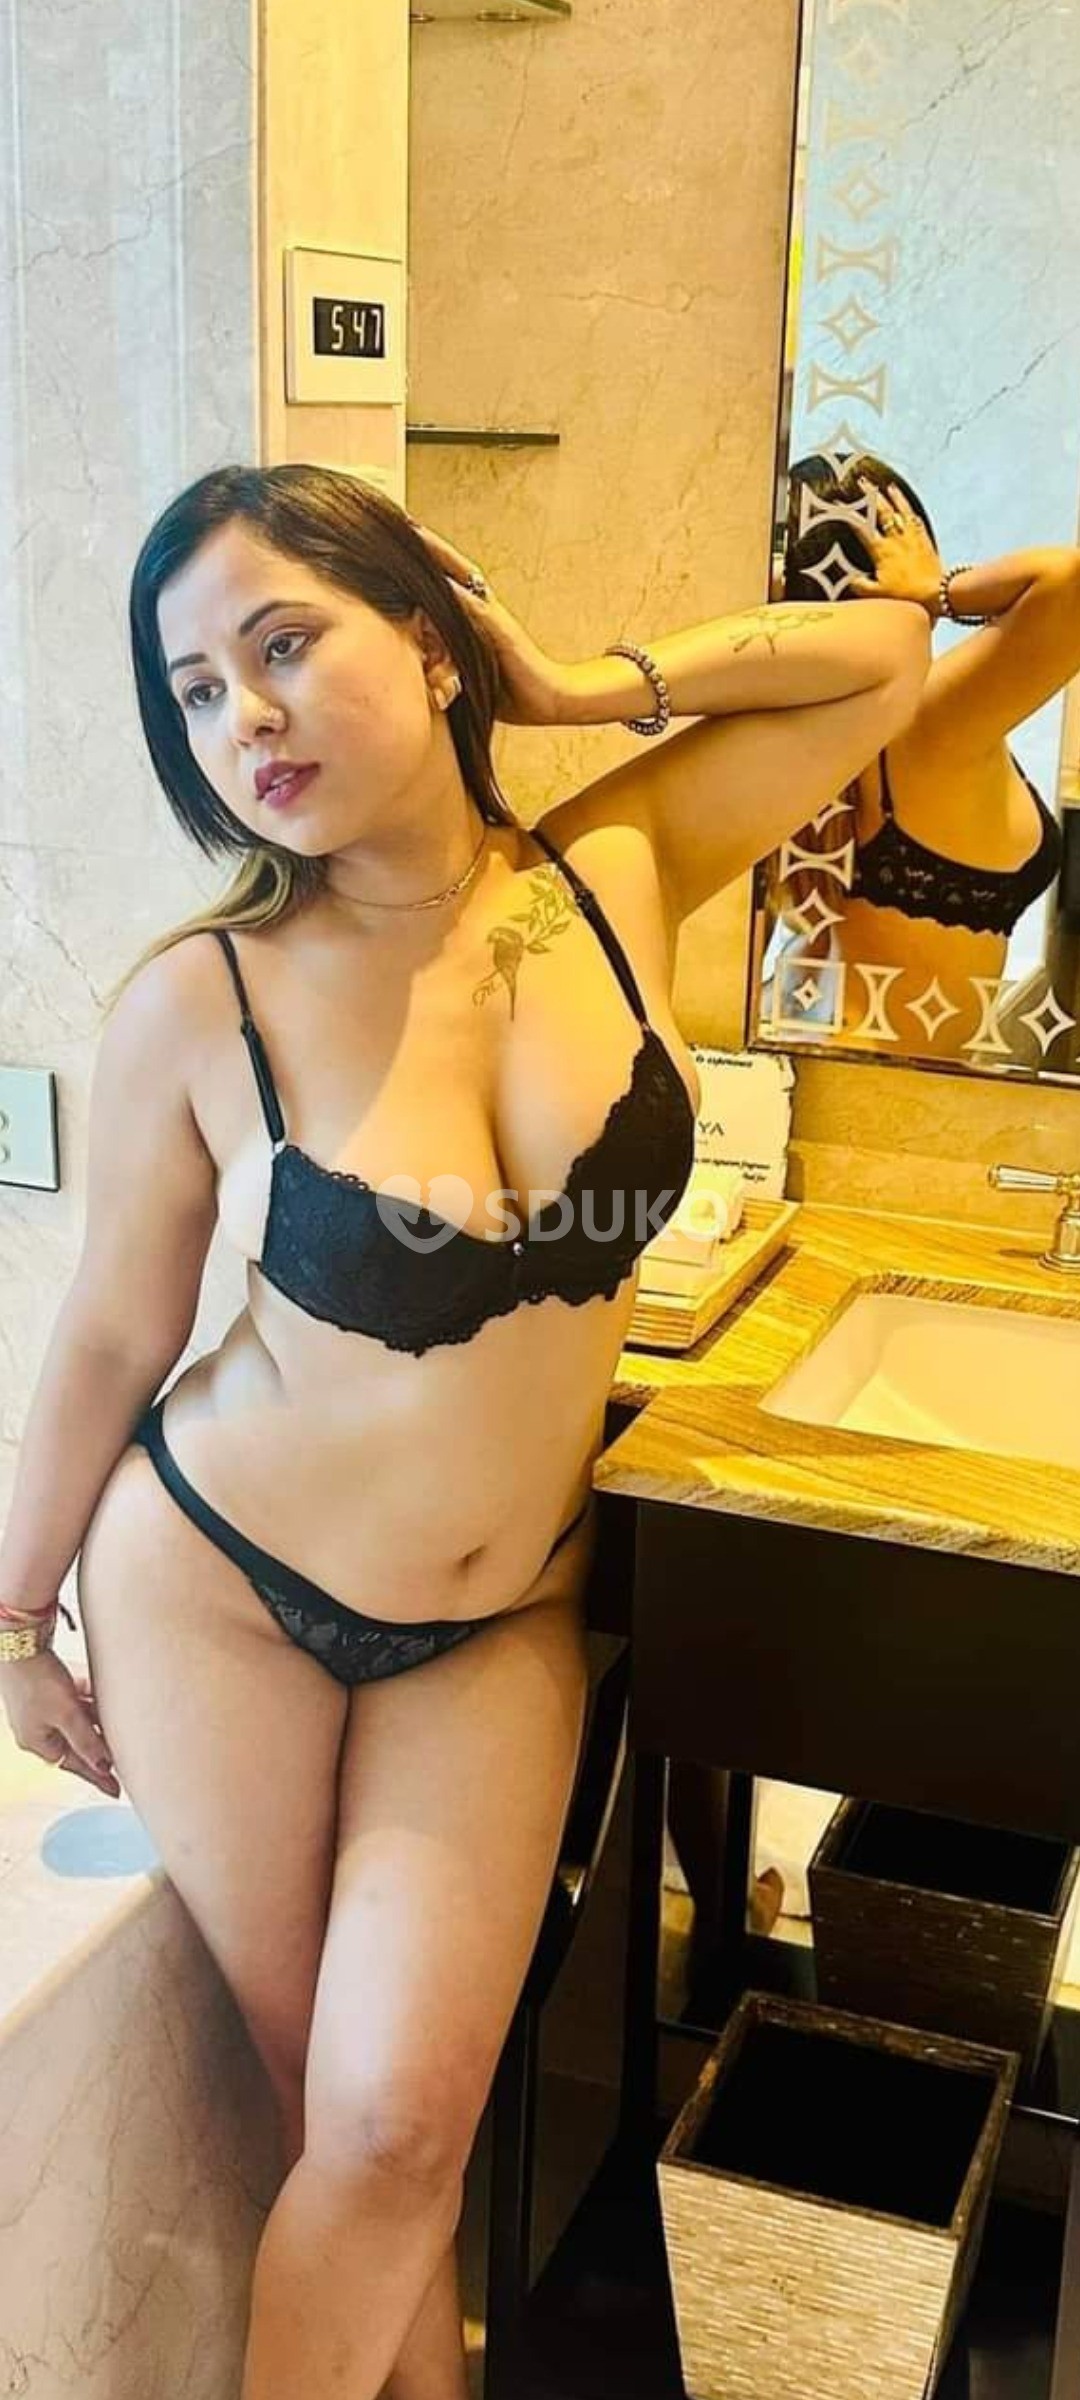 MY SELF 76O7I38-9O6 POOJA AMRITSAR NO ADVANCE ONLY CASH PAYMENT AMRITSAR INDEPENDENT MODELS CALL GIRLS(78)